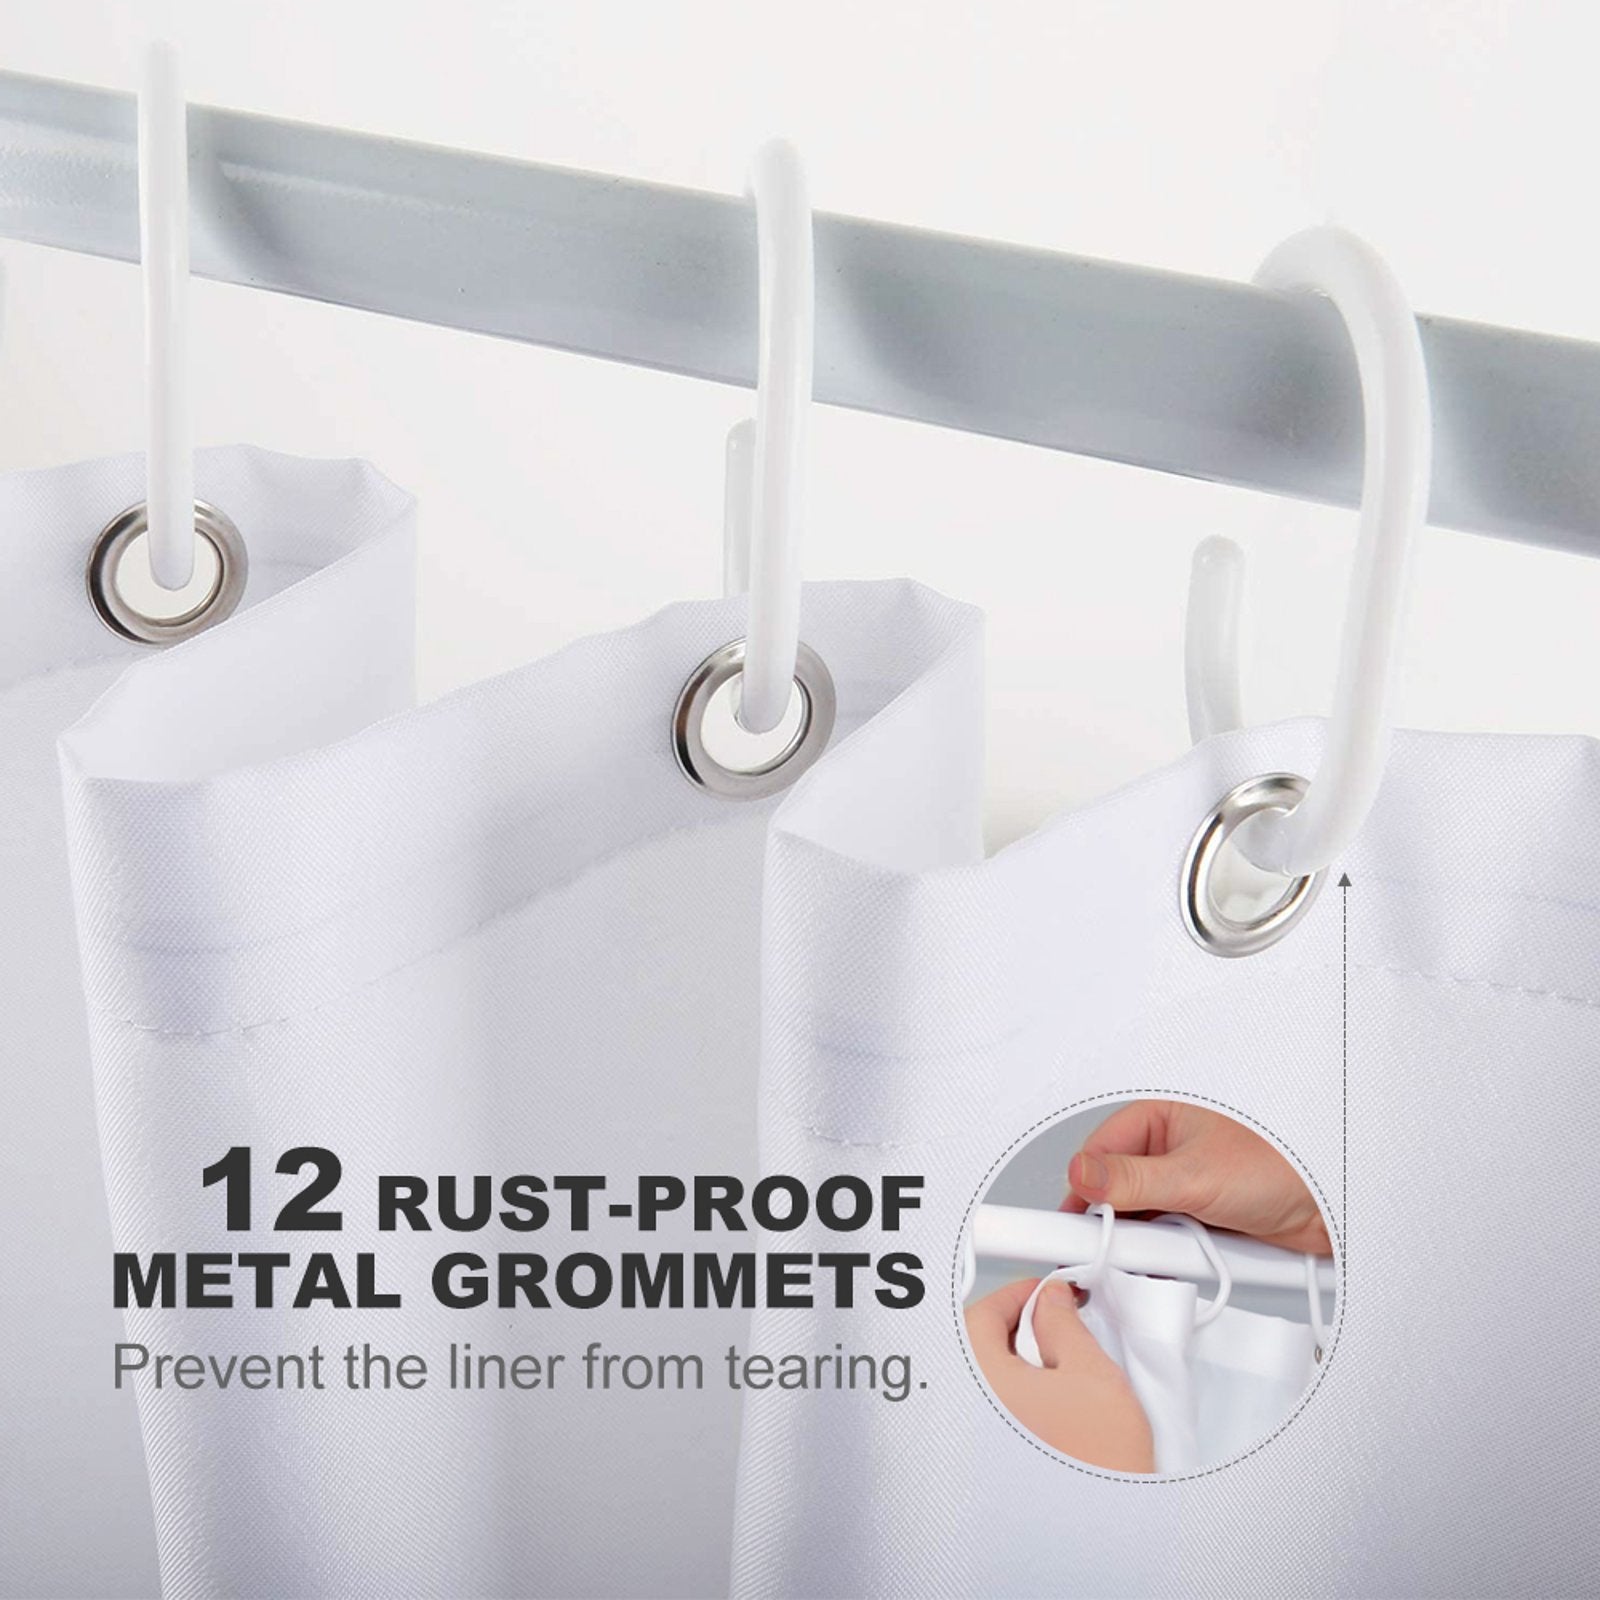 Close-up of a white curtain hanging on hooks with text stating, "12 Rust-Proof Metal Grommets Prevent the Liner from Tearing," and a smaller image showing a person installing a hook through a grommet. Add flair to your bathroom decor with our Artistic Cute Colourful Elephant Shower Curtain-Cottoncat featuring an artistic cute elephant design by Cotton Cat.